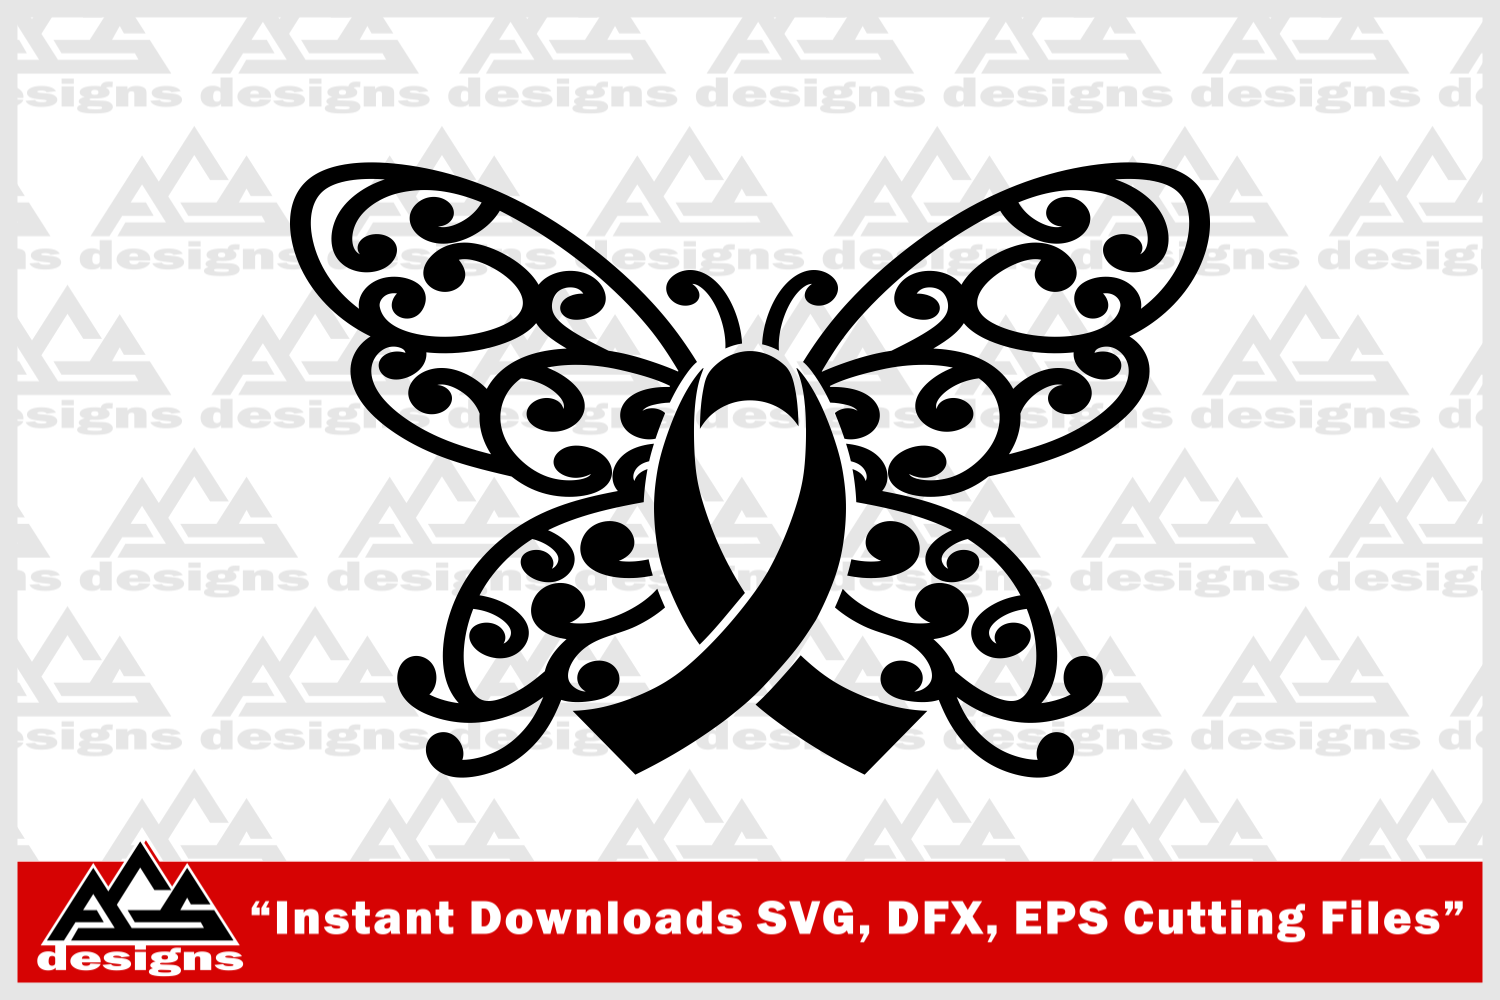 Butterfly Cancer Awareness Ribbon Svg Design By AgsDesign ...